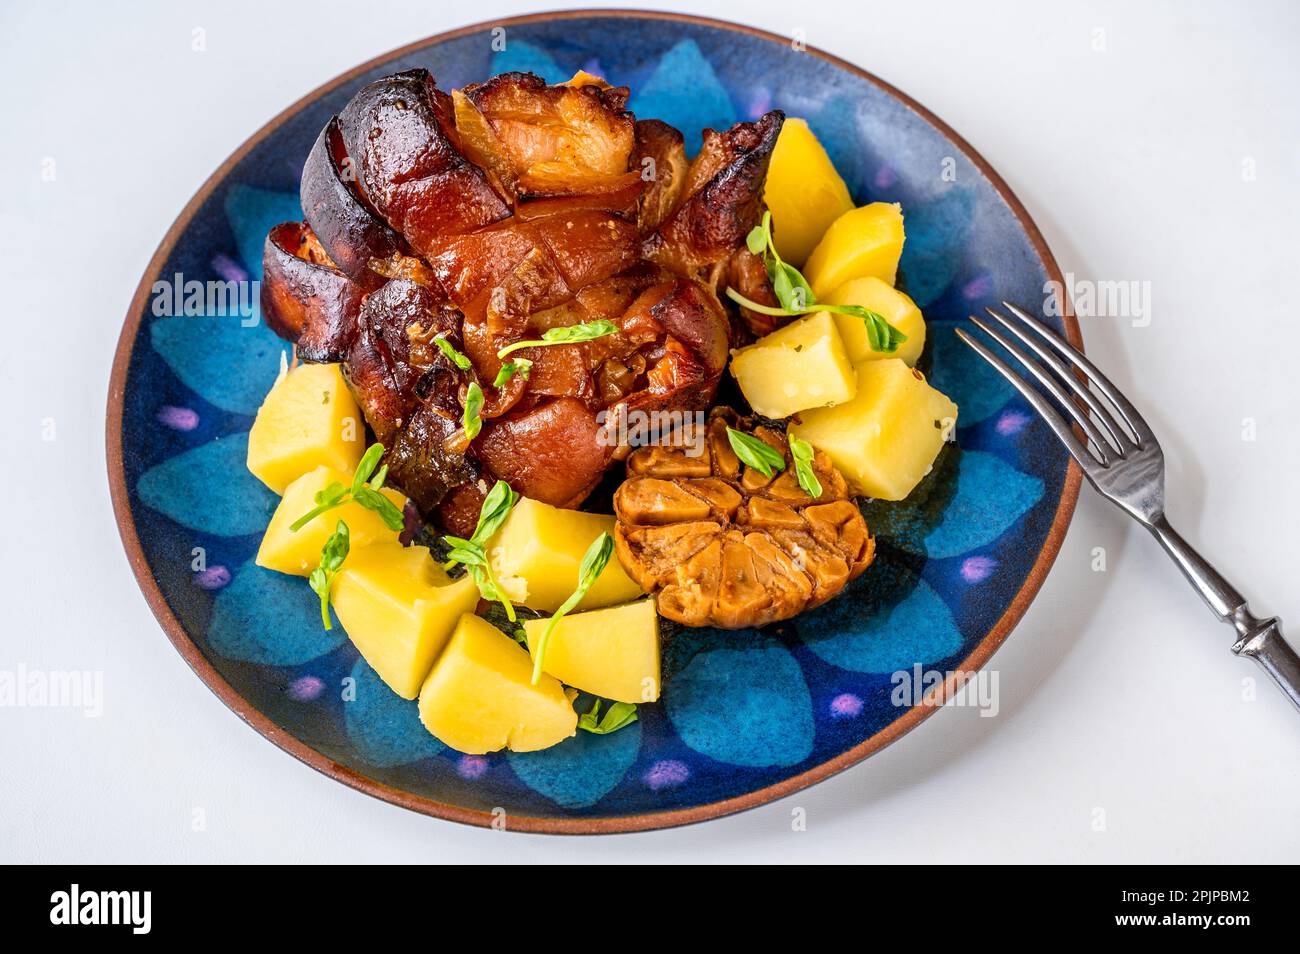 Baked until golden brown spicy pork belly, garlic and potato on decorative blue plate, fork on white background. Stock Photo